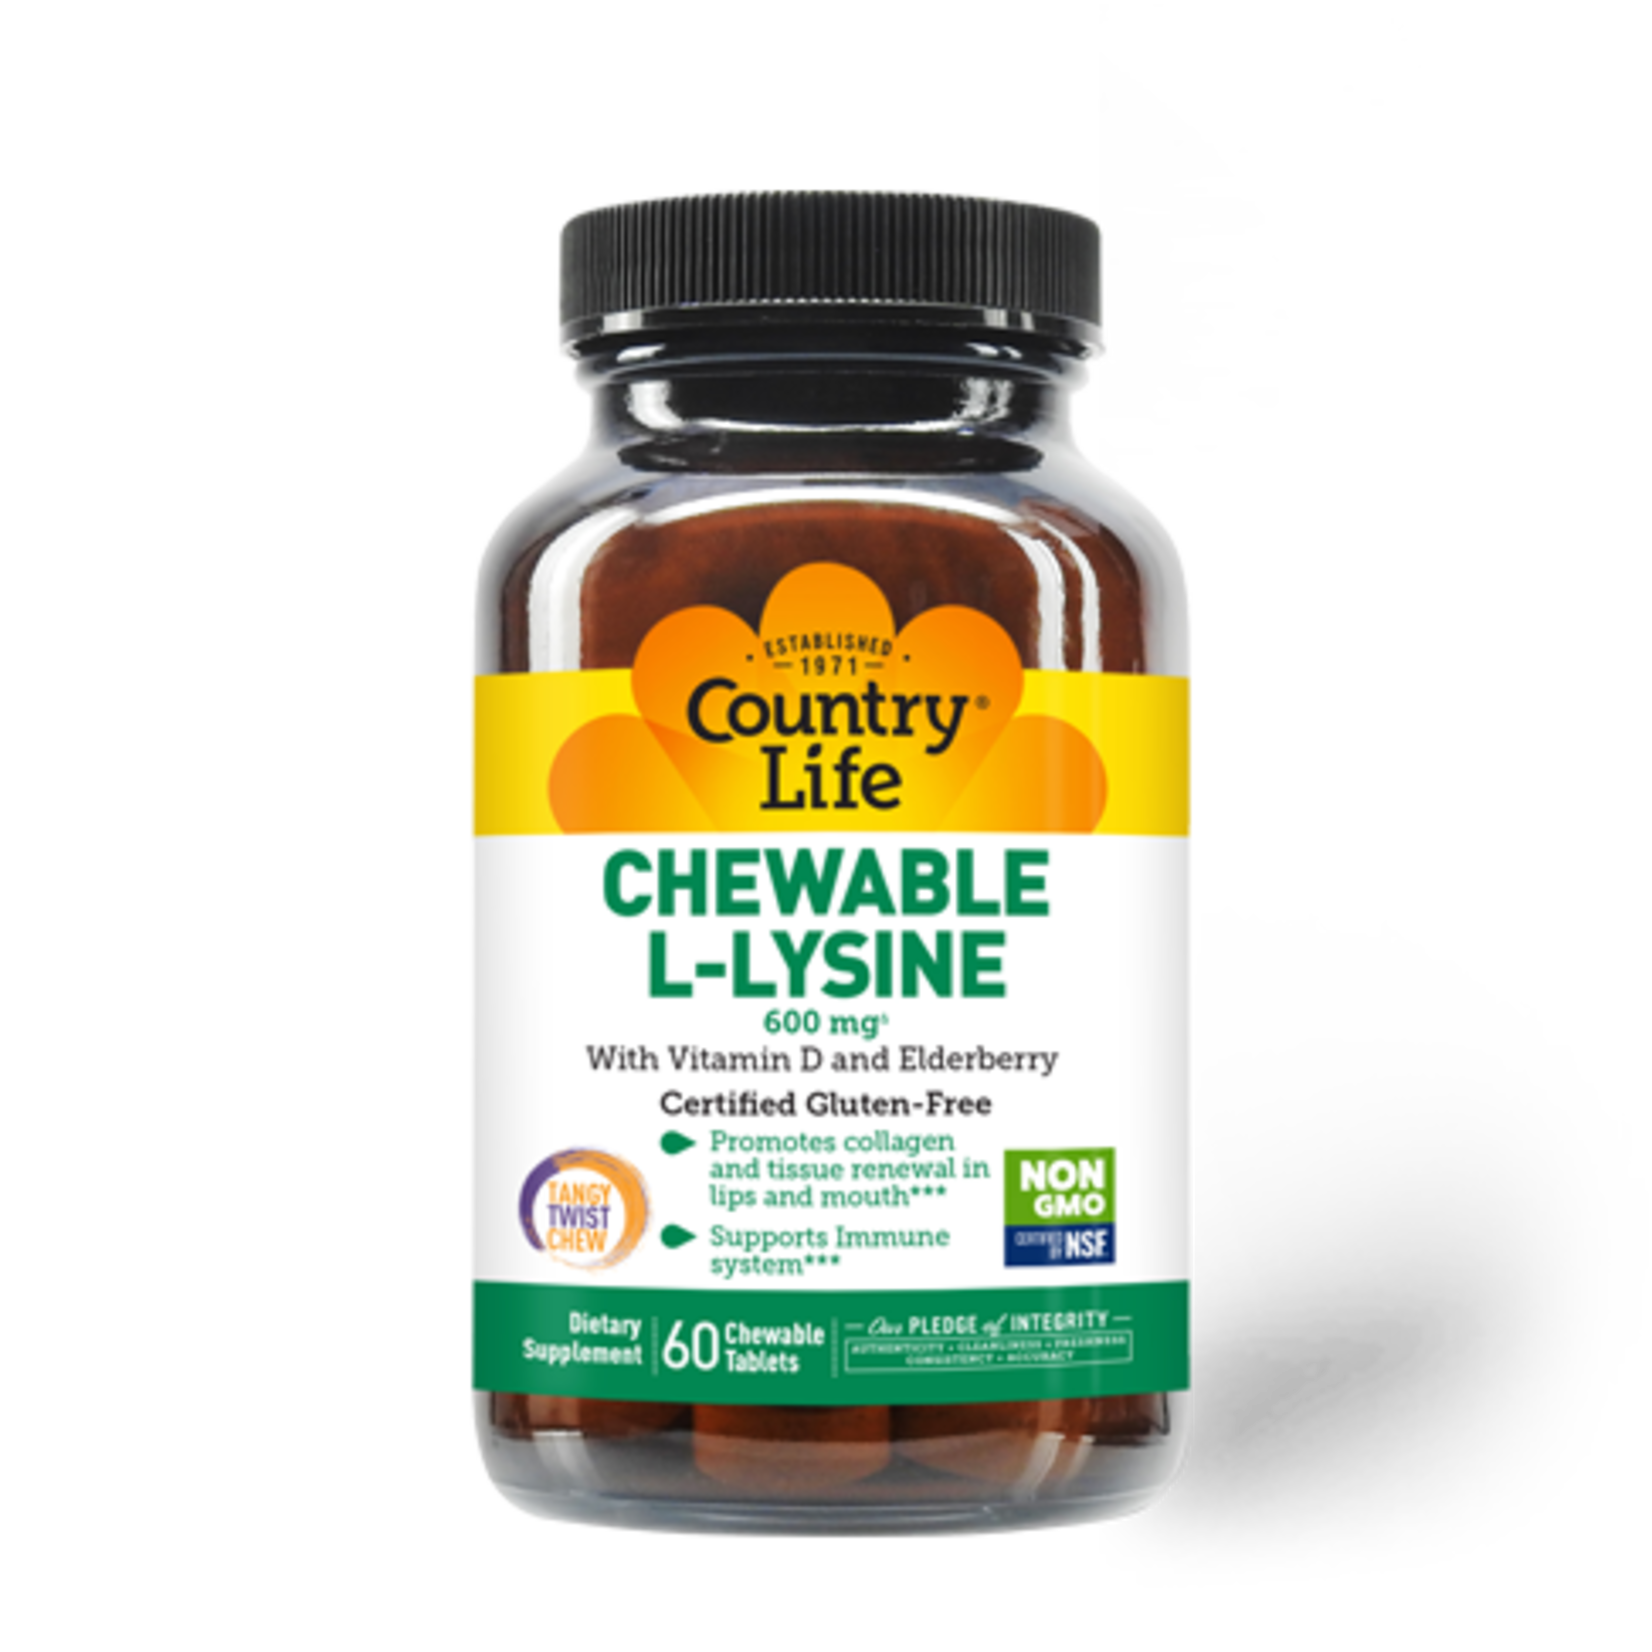 Country Life Country Life - Chewable L-Lysine 600mg - 60 count